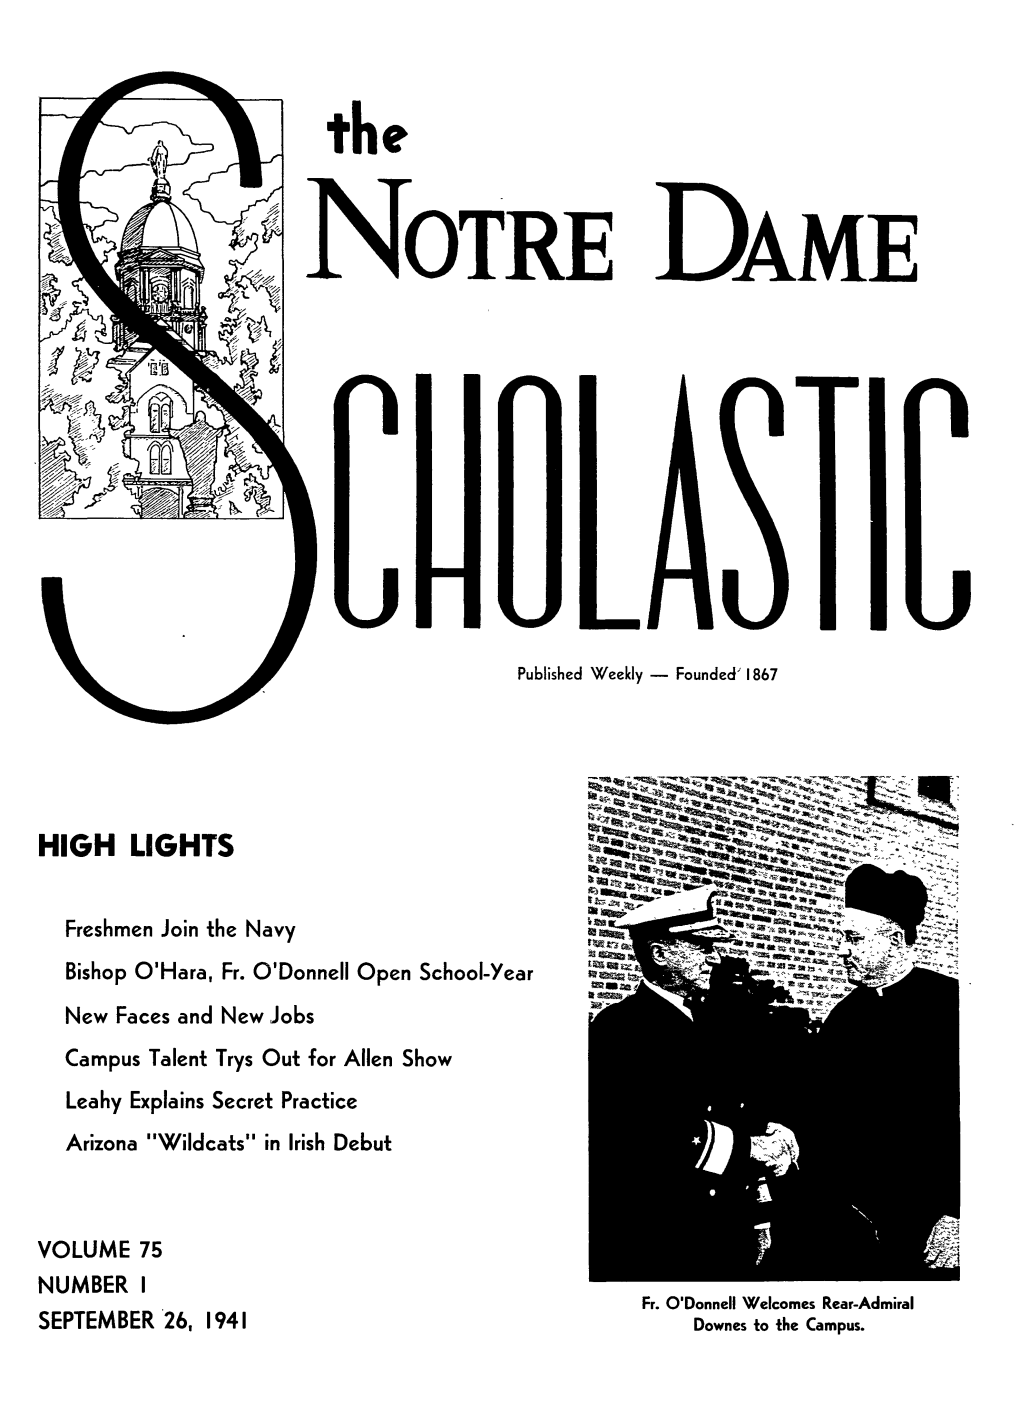 Archives of the University of Notre Dame